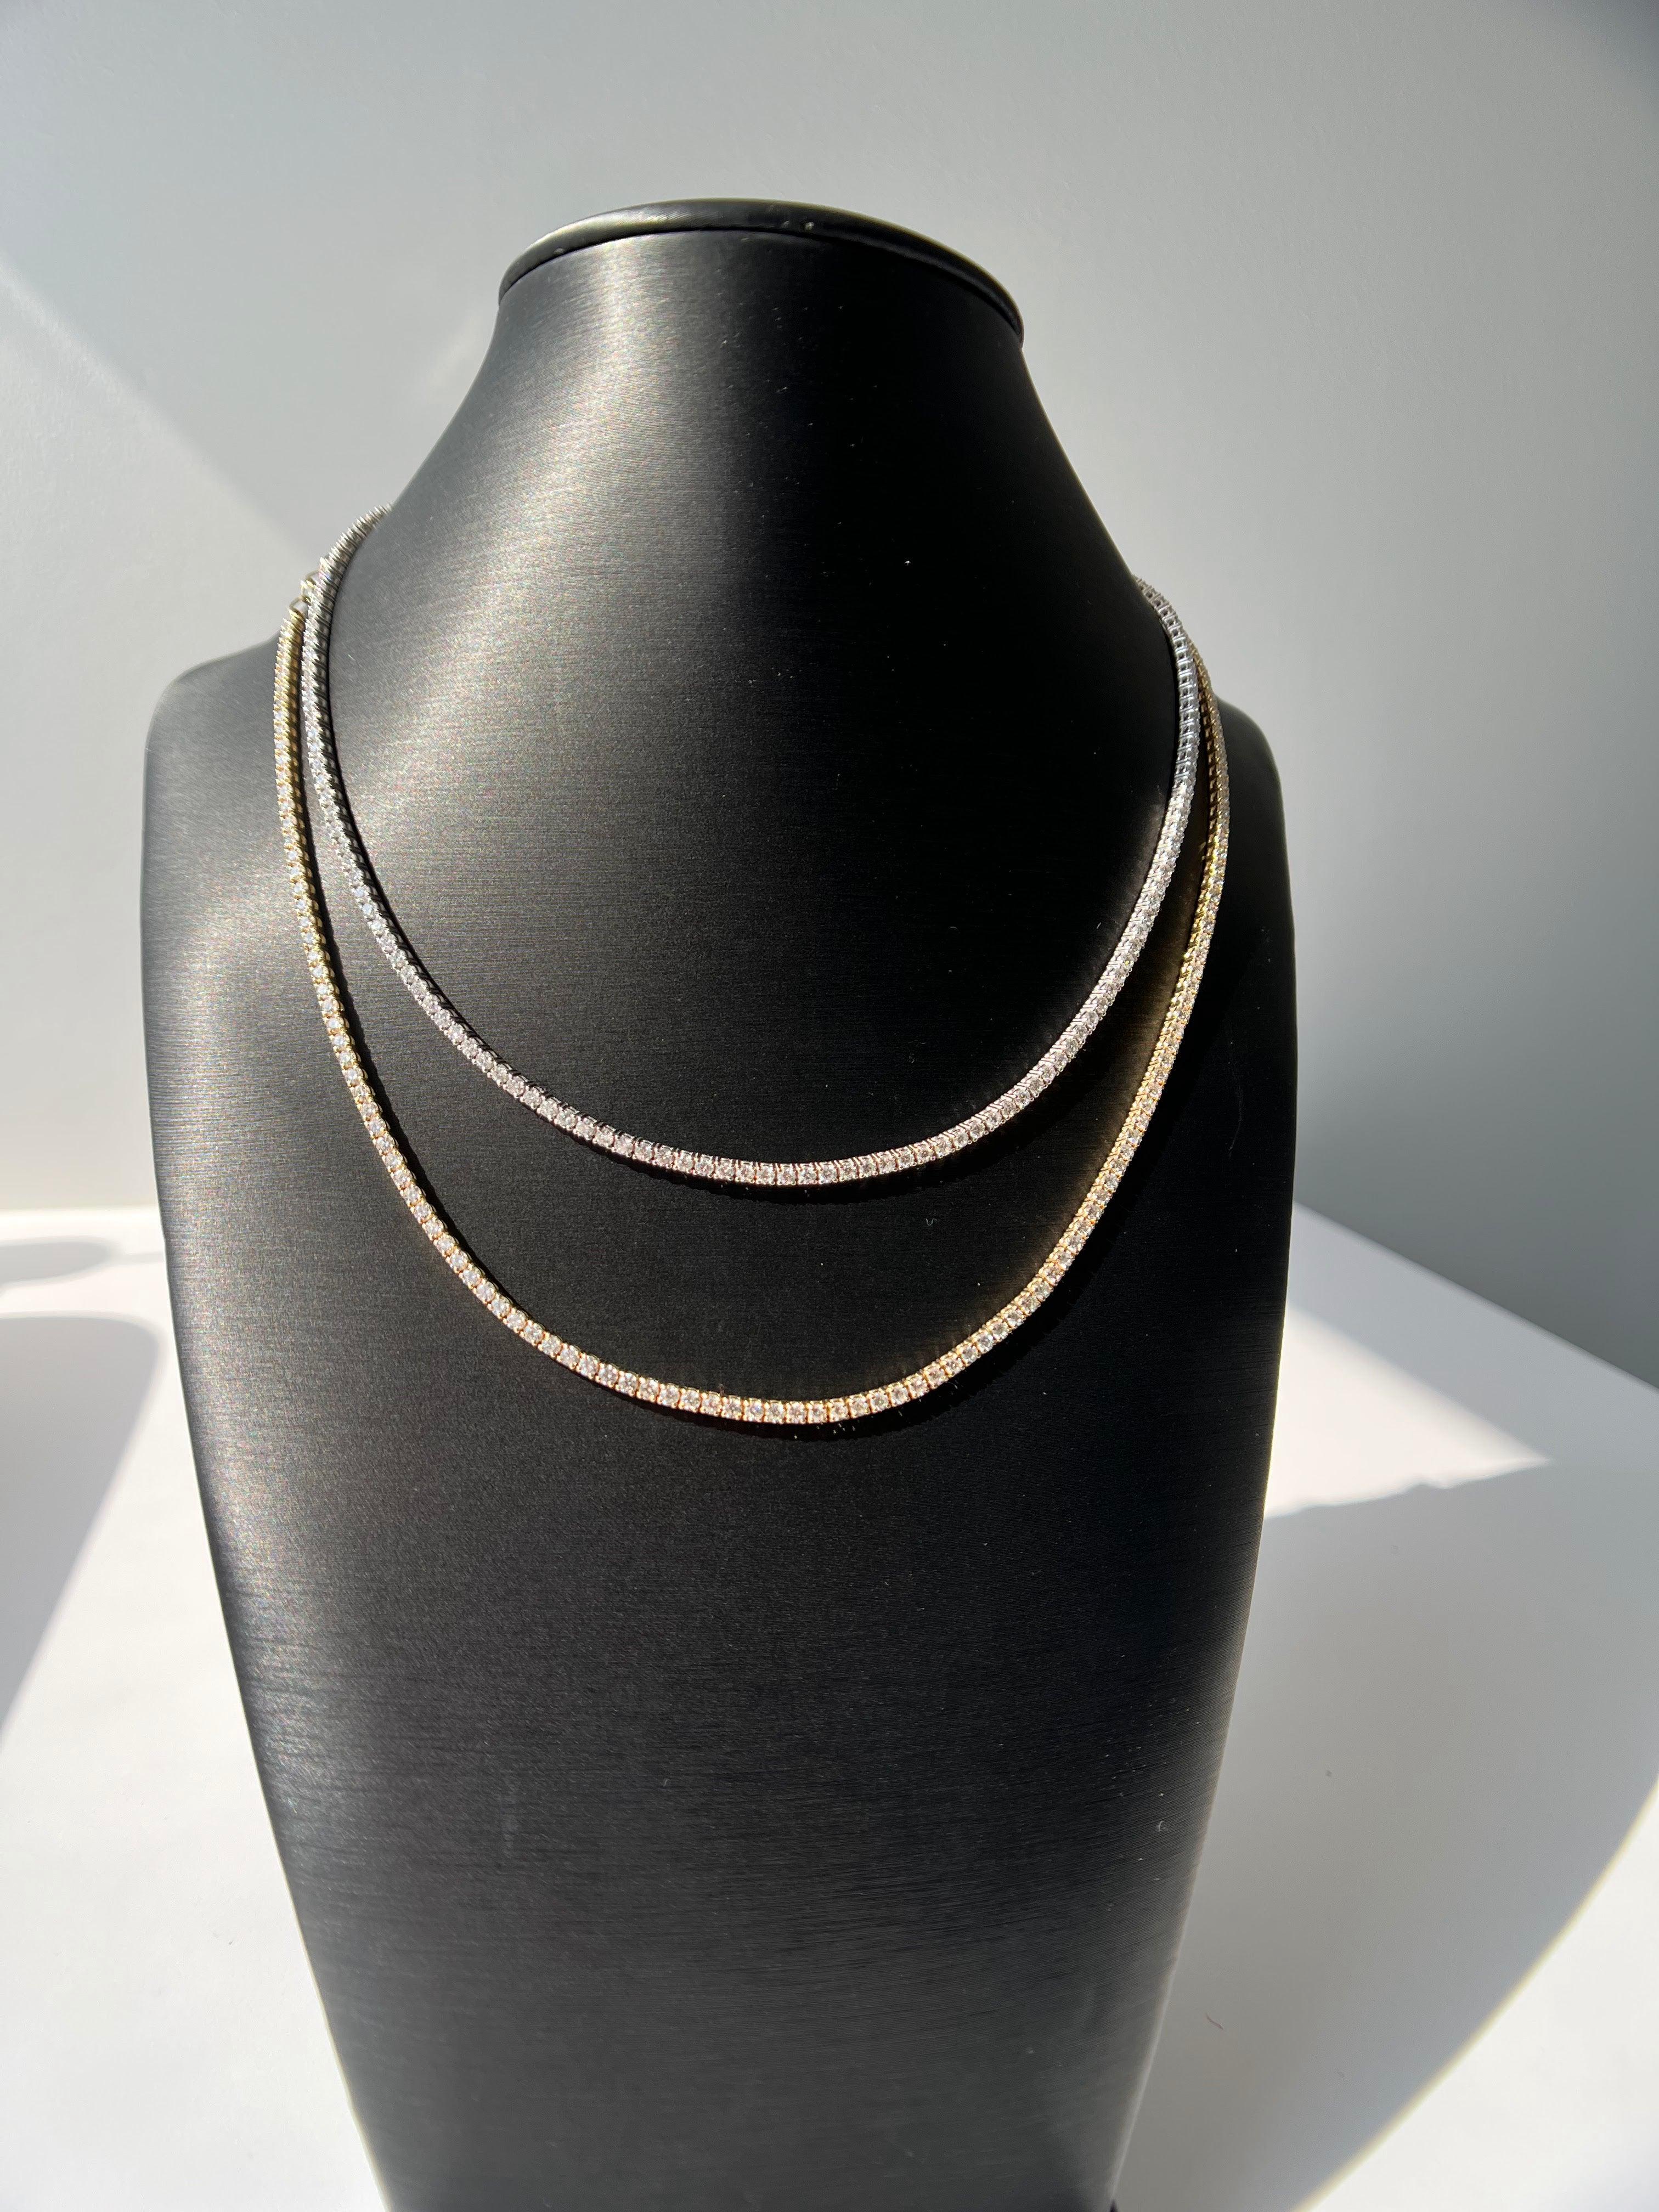 14k Gold Diamond Chain Necklace, Tennis Necklace, Choker Adjustable Necklace

Sweet and Dainty, This necklace is the perfect piece to add to your jewelry collection. Perfect for your outfit, day or night. Set with shimmering round natural diamonds.